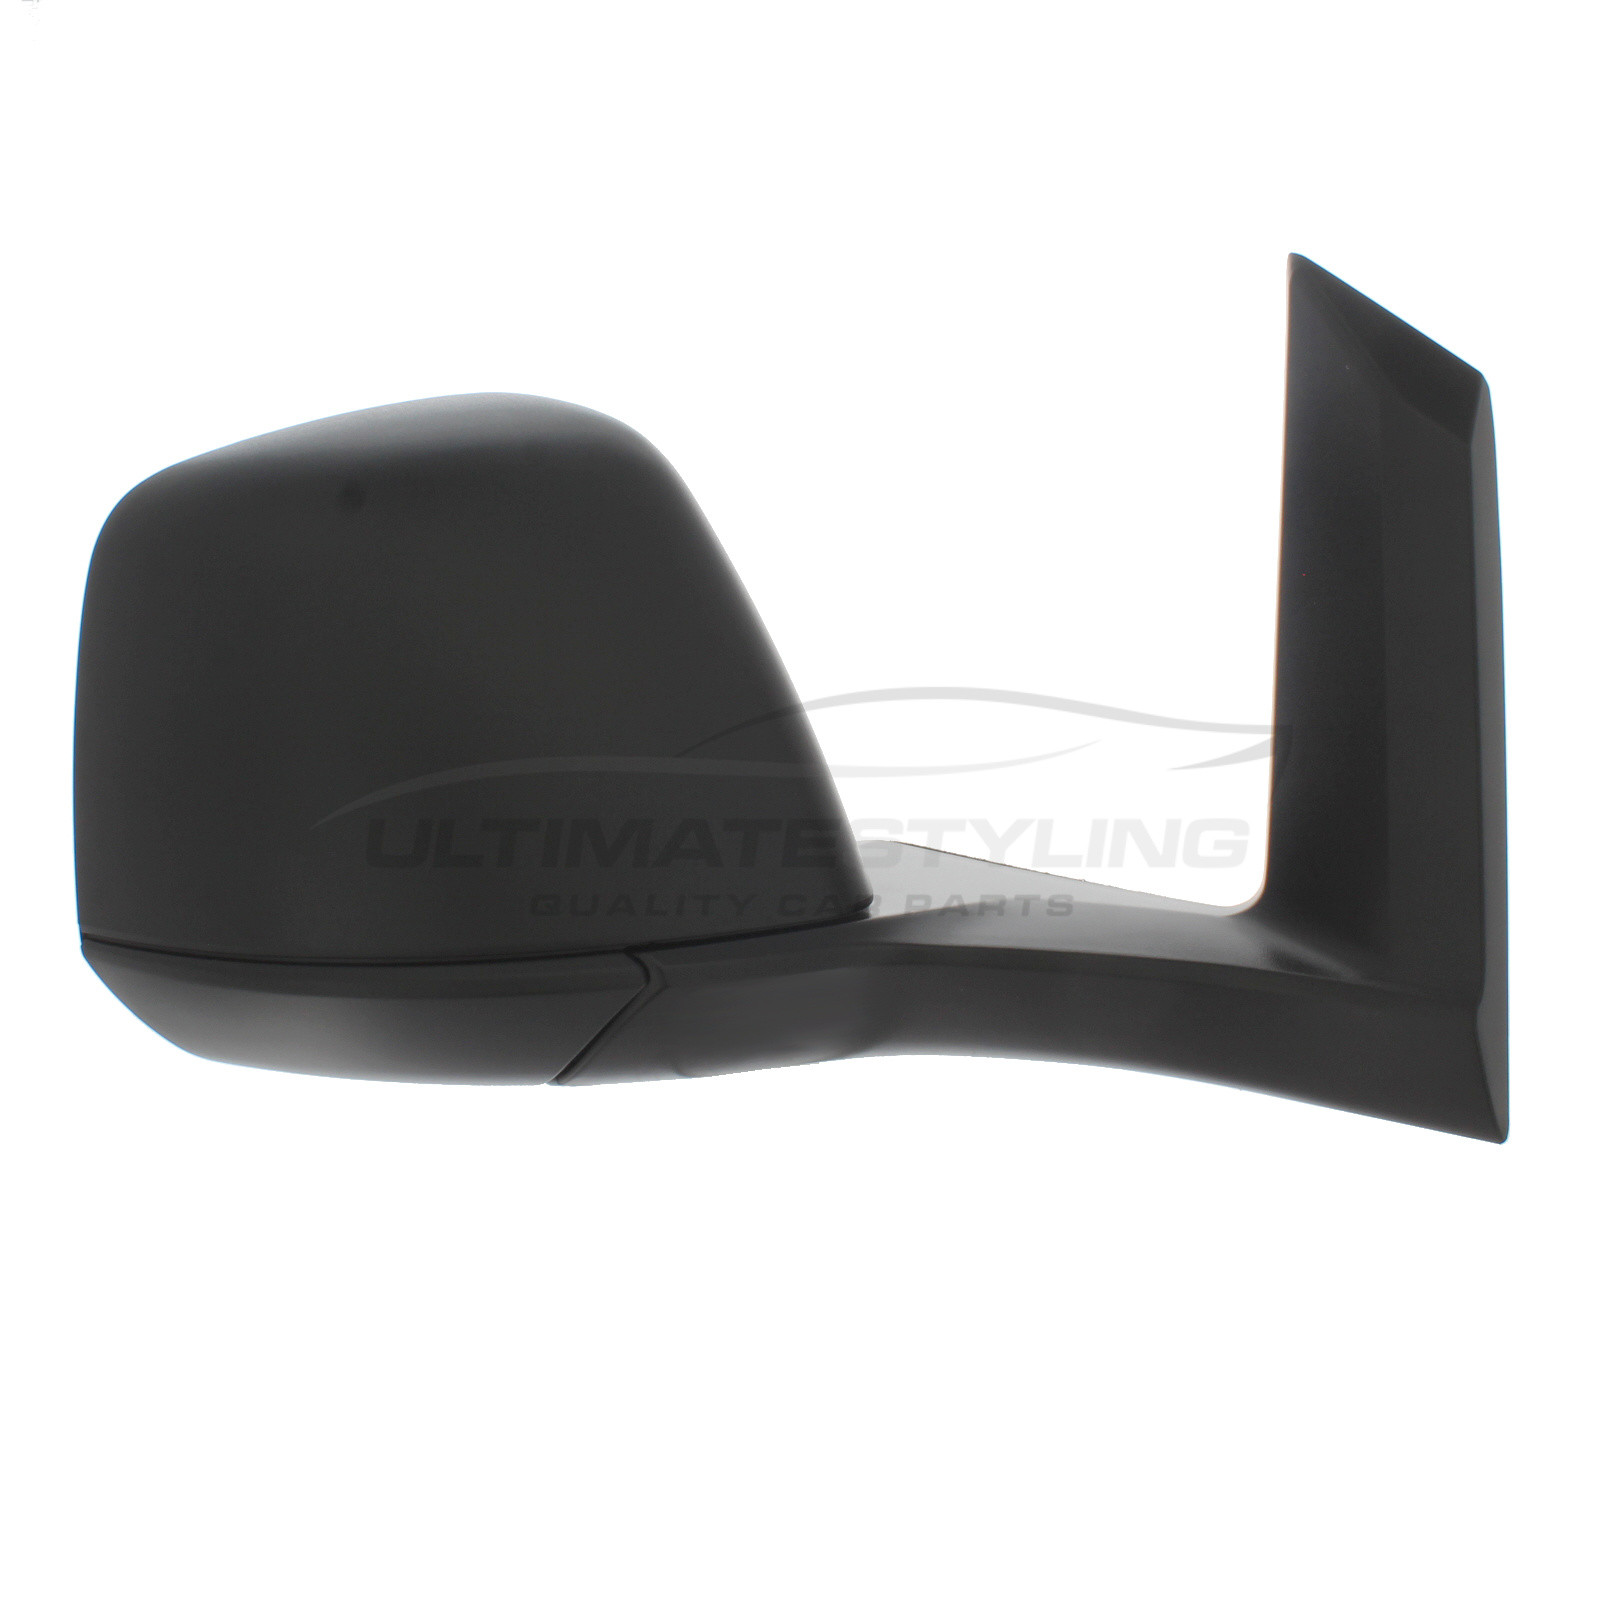 Ford Tourneo Connect / Transit Connect Wing Mirror / Door Mirror - Drivers Side (RH) - Manual adjustment - Non-Heated Glass - Black